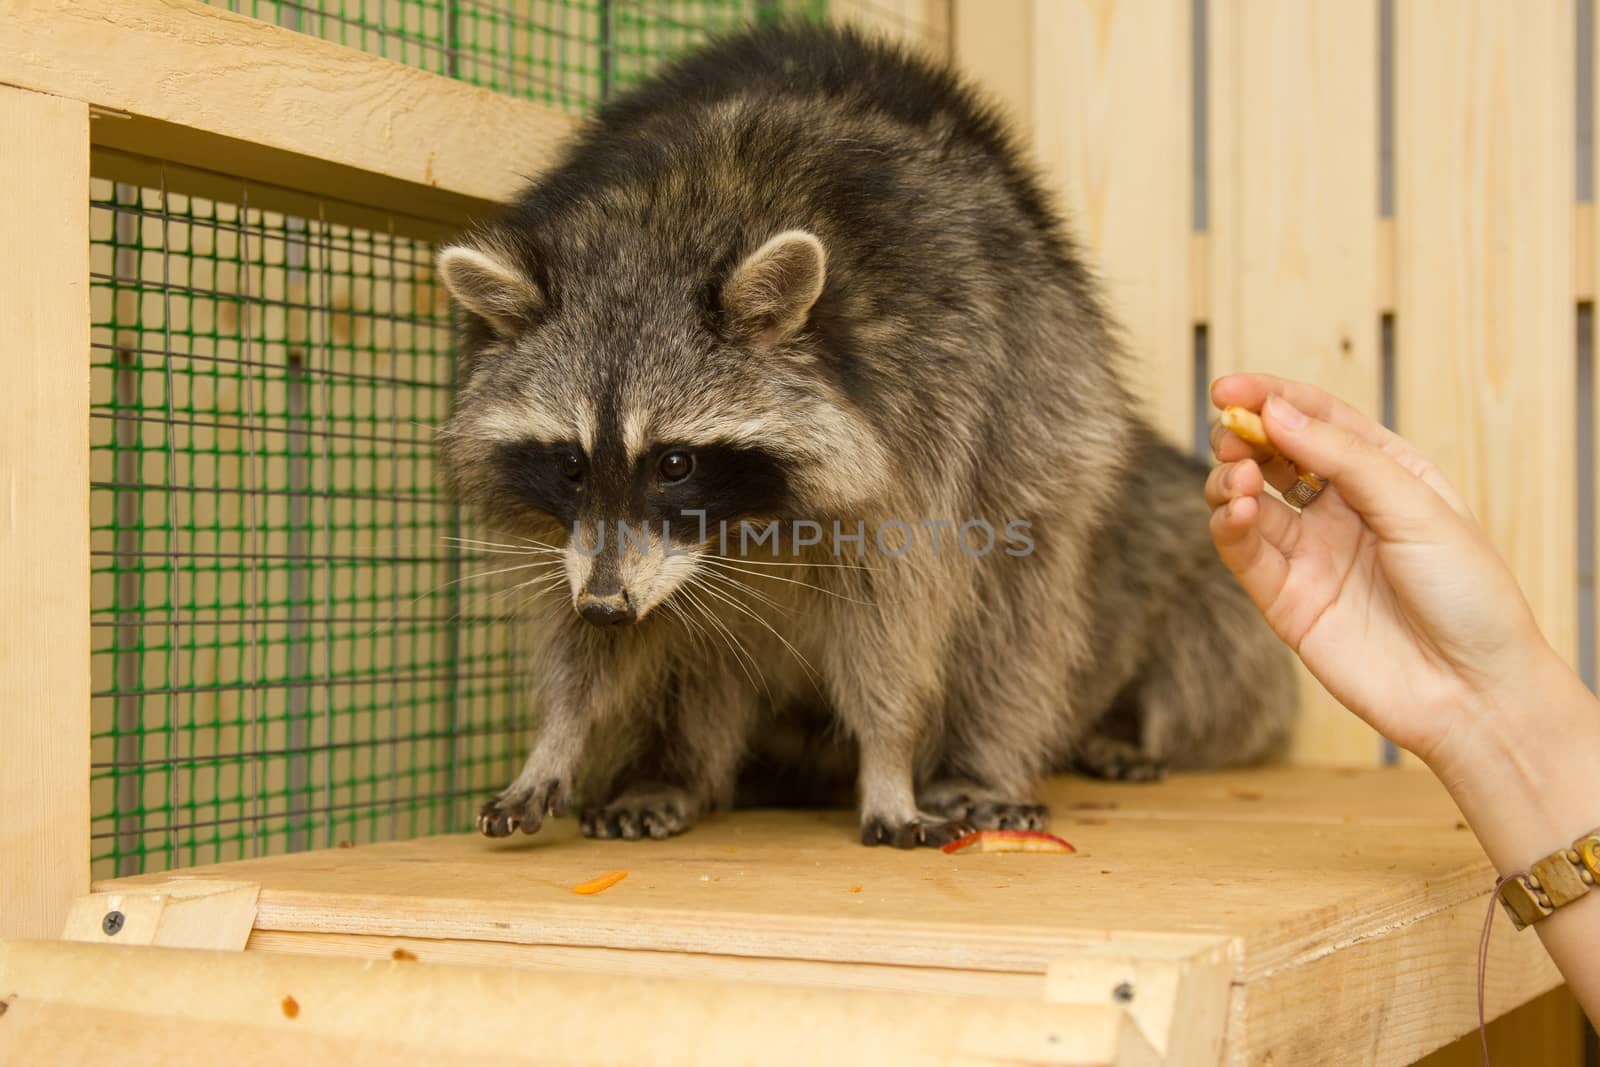 raccoon petting zoo sits on the site